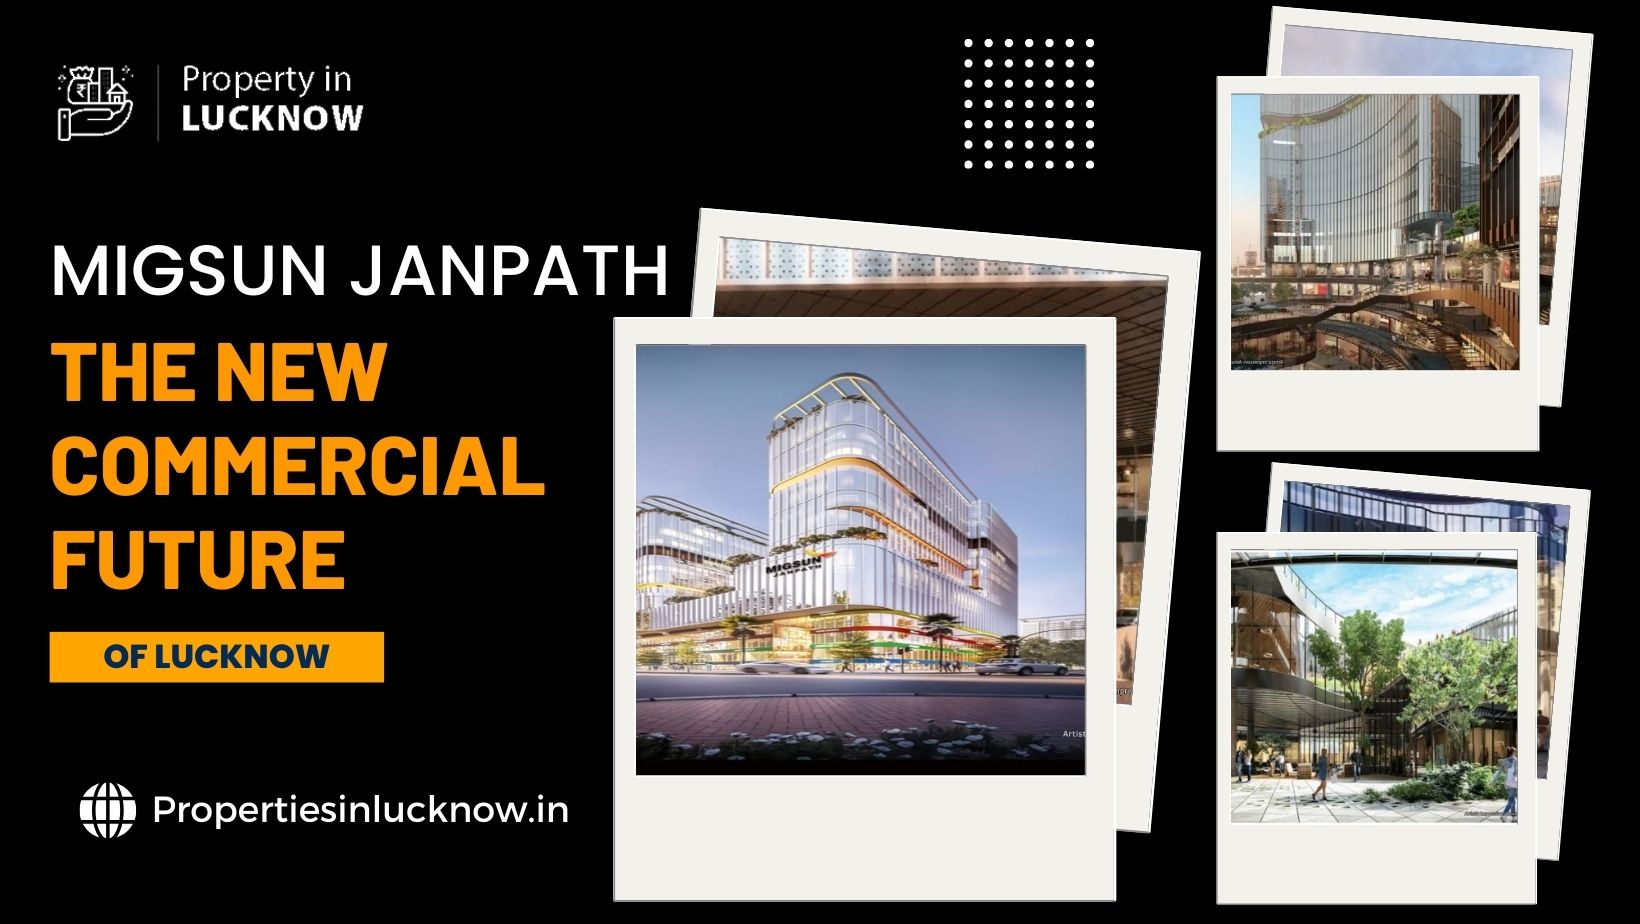 How Migsun Janpath Is The New Commercial Future Of Lucknow | Property in Lucknow